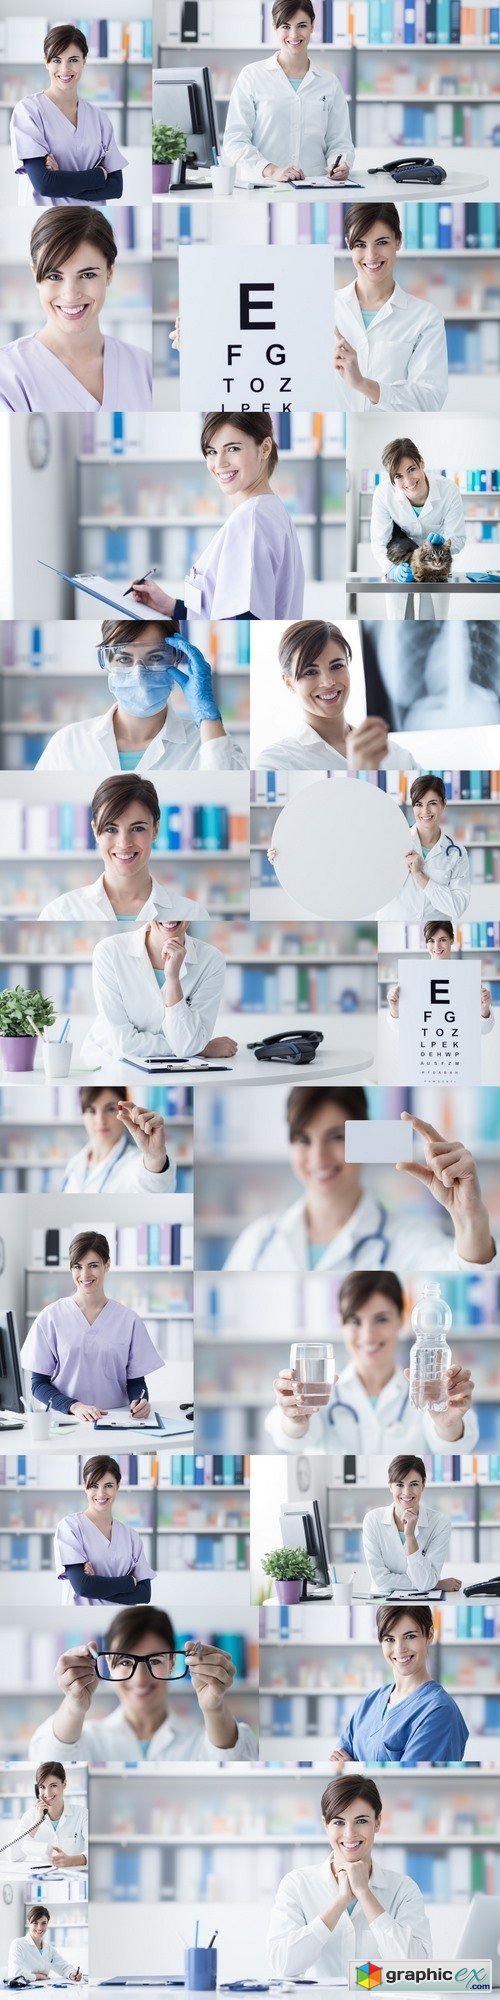 Doctor working at office desk